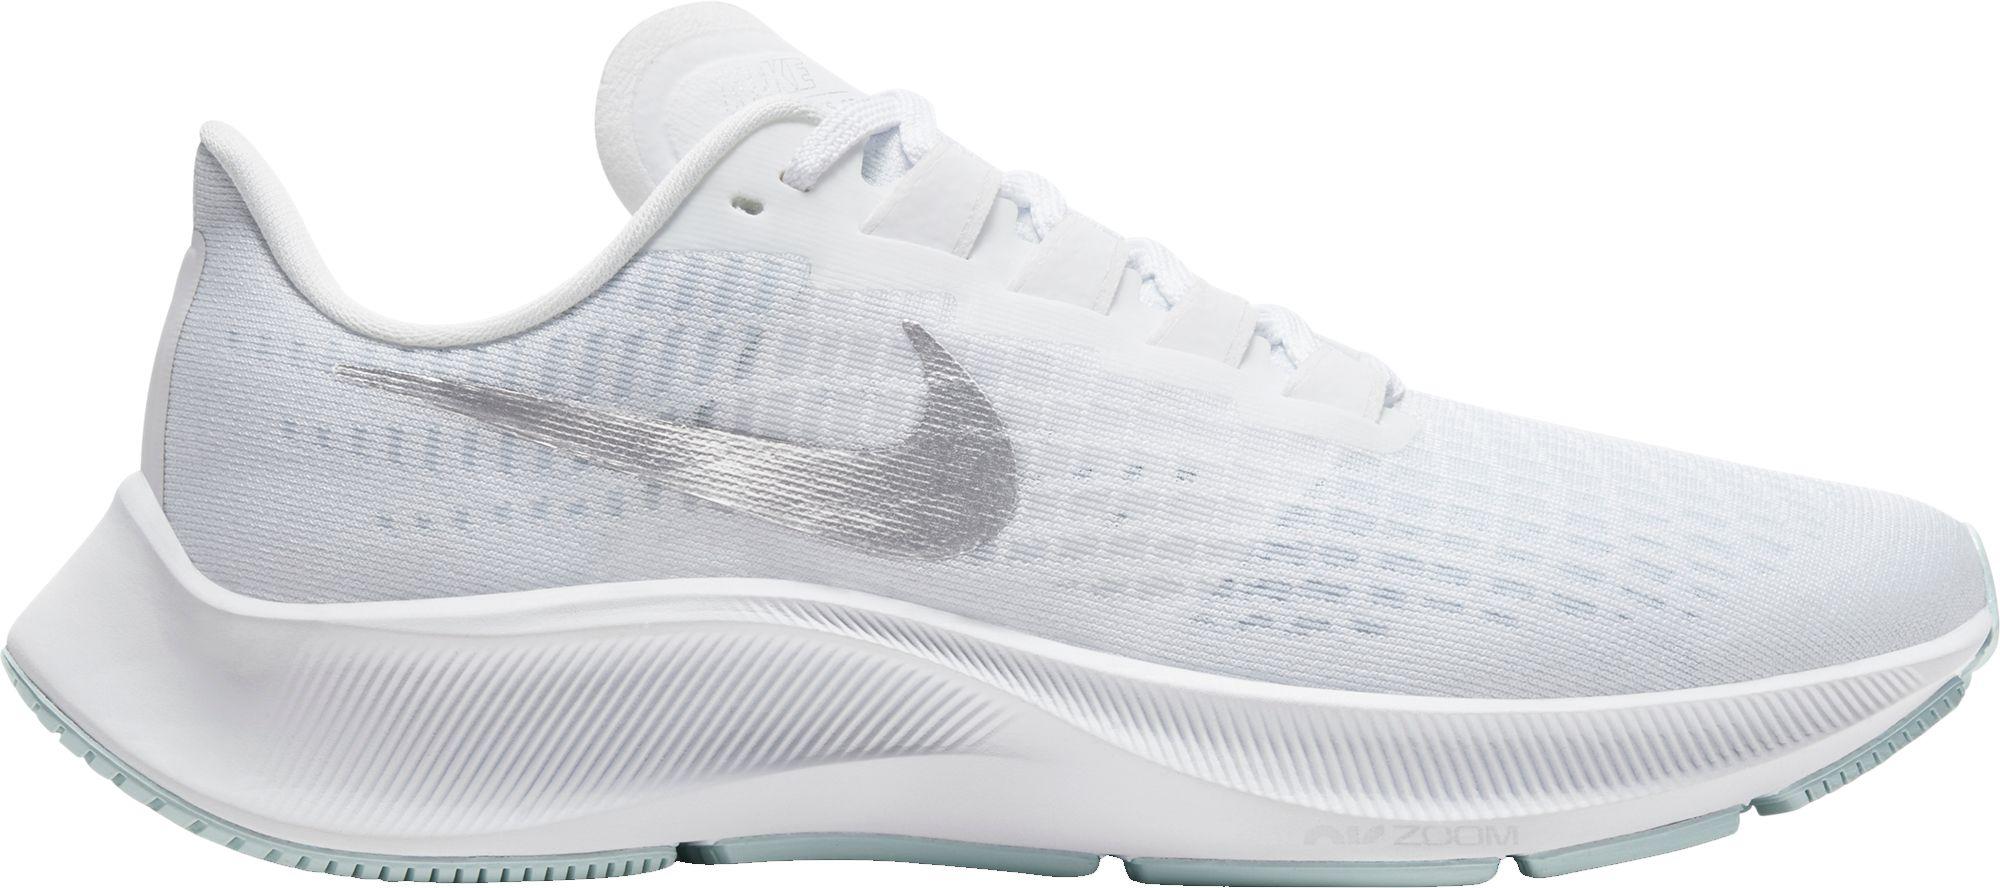 Nike Air Zoom Pegasus 37 Running Shoes in White/Silver (White) - Lyst